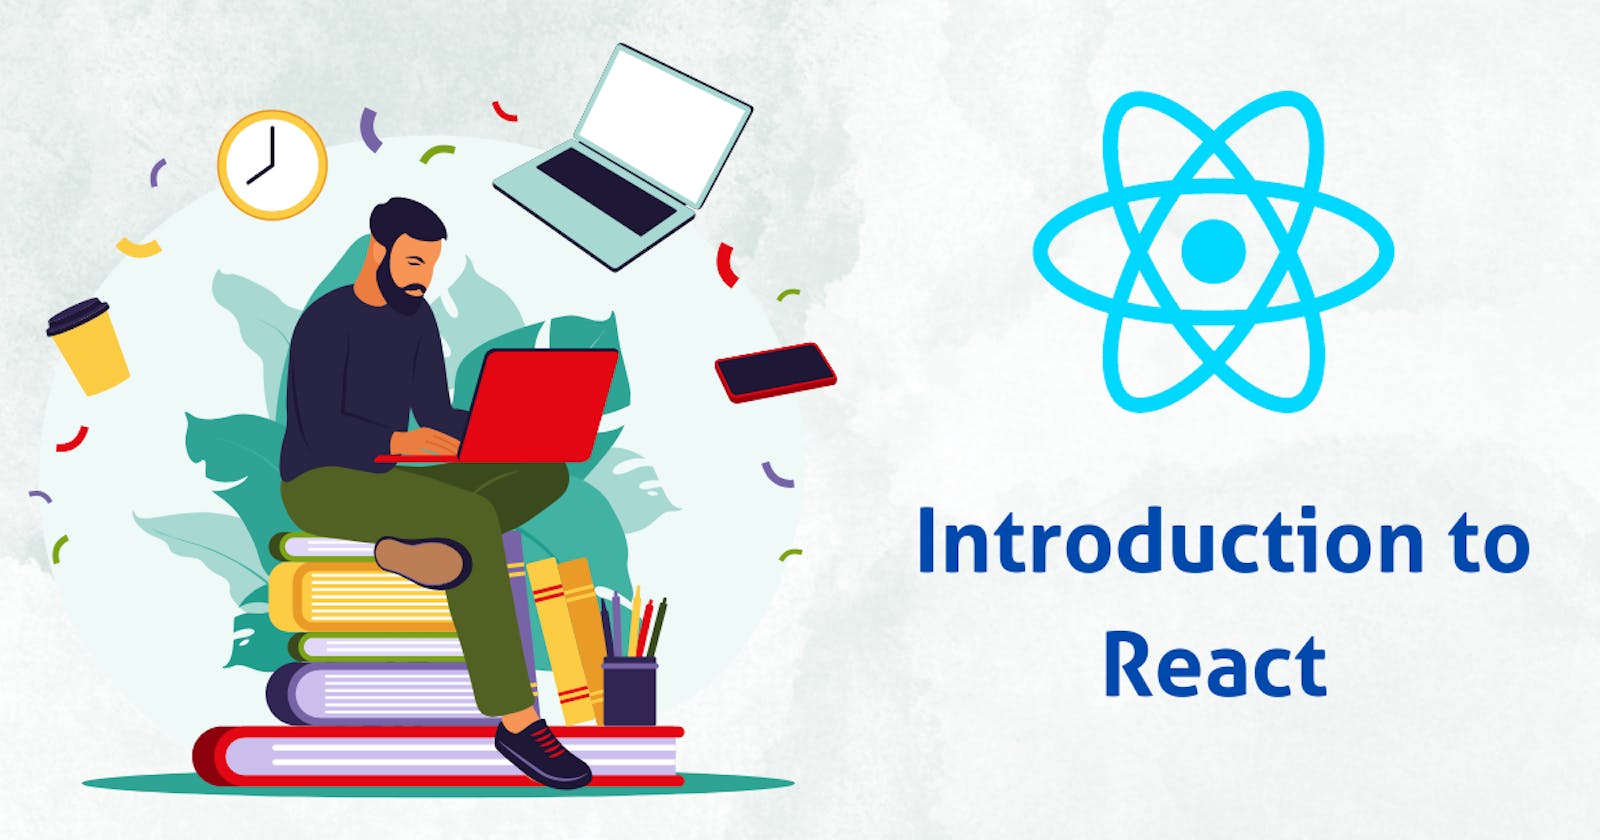 Introduction to React: Getting started with building user interfaces in React.